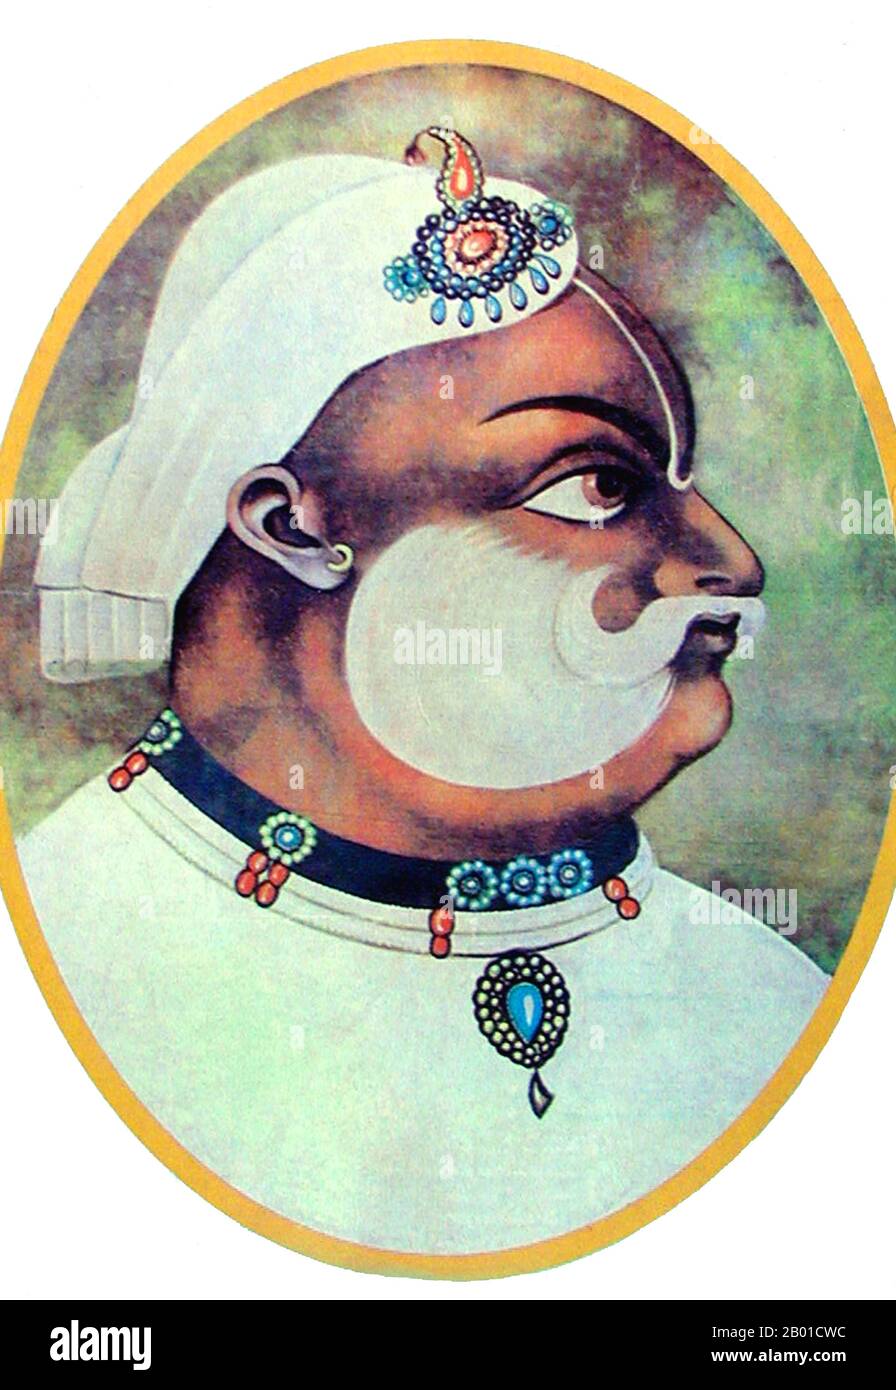 India: Maharaja Suraj Mal (13 February 1707 - 25 December 1763), ruler of Bharatpur in Rajasthan (r. 1755-1763). Miniature portrait, 1763.  Maharaja Suraj Mal has been described by a contemporary historian as 'the Plato of the Jat people' and by a modern writer as the 'Jat Ulysses', because of his political sagacity, steady intellect and clear vision. He is associated with the rise of Jat power, for his love of literature, and for his military and diplomatic achievements. Stock Photo